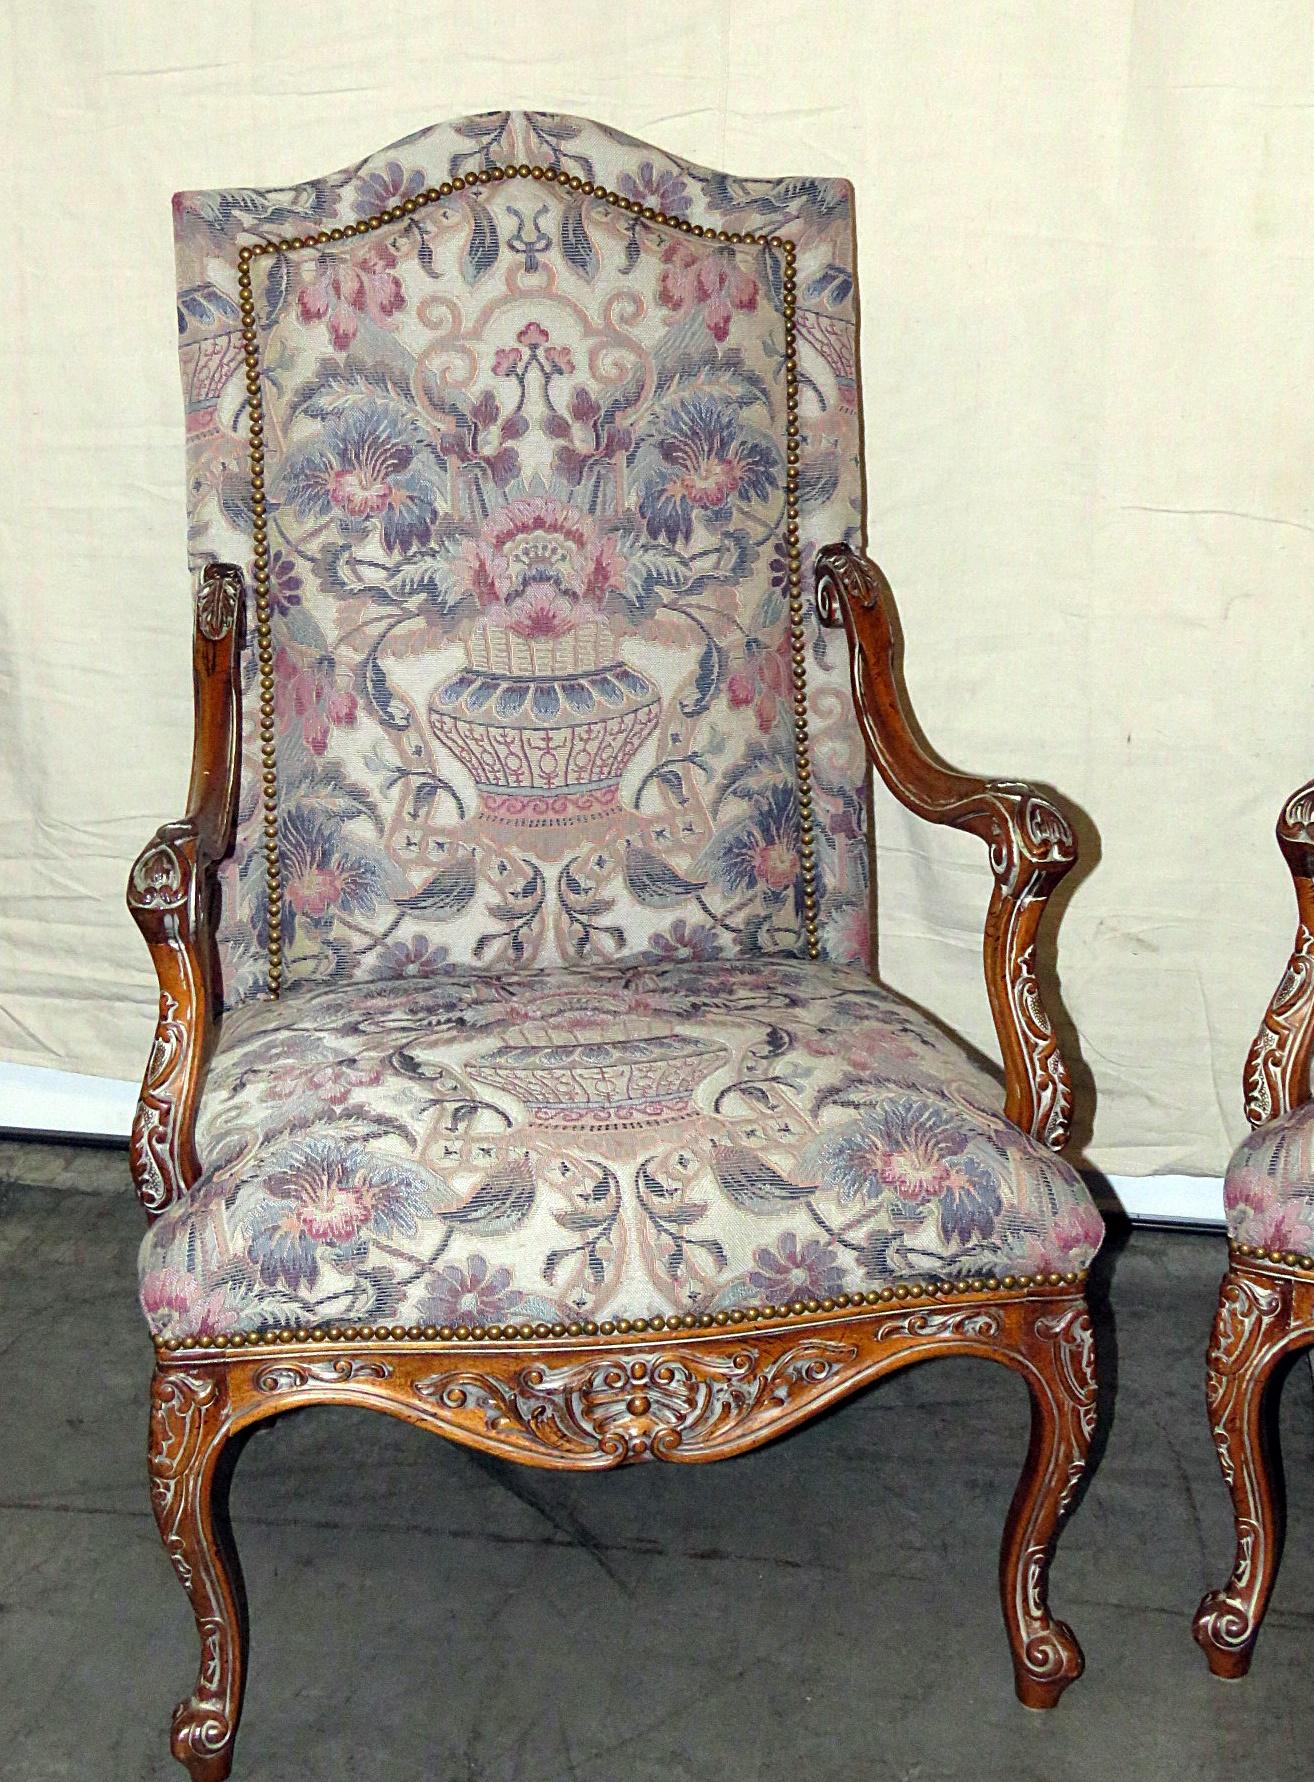 Pair of Louis XV style armchairs with machine upholstery and nailhead trim.